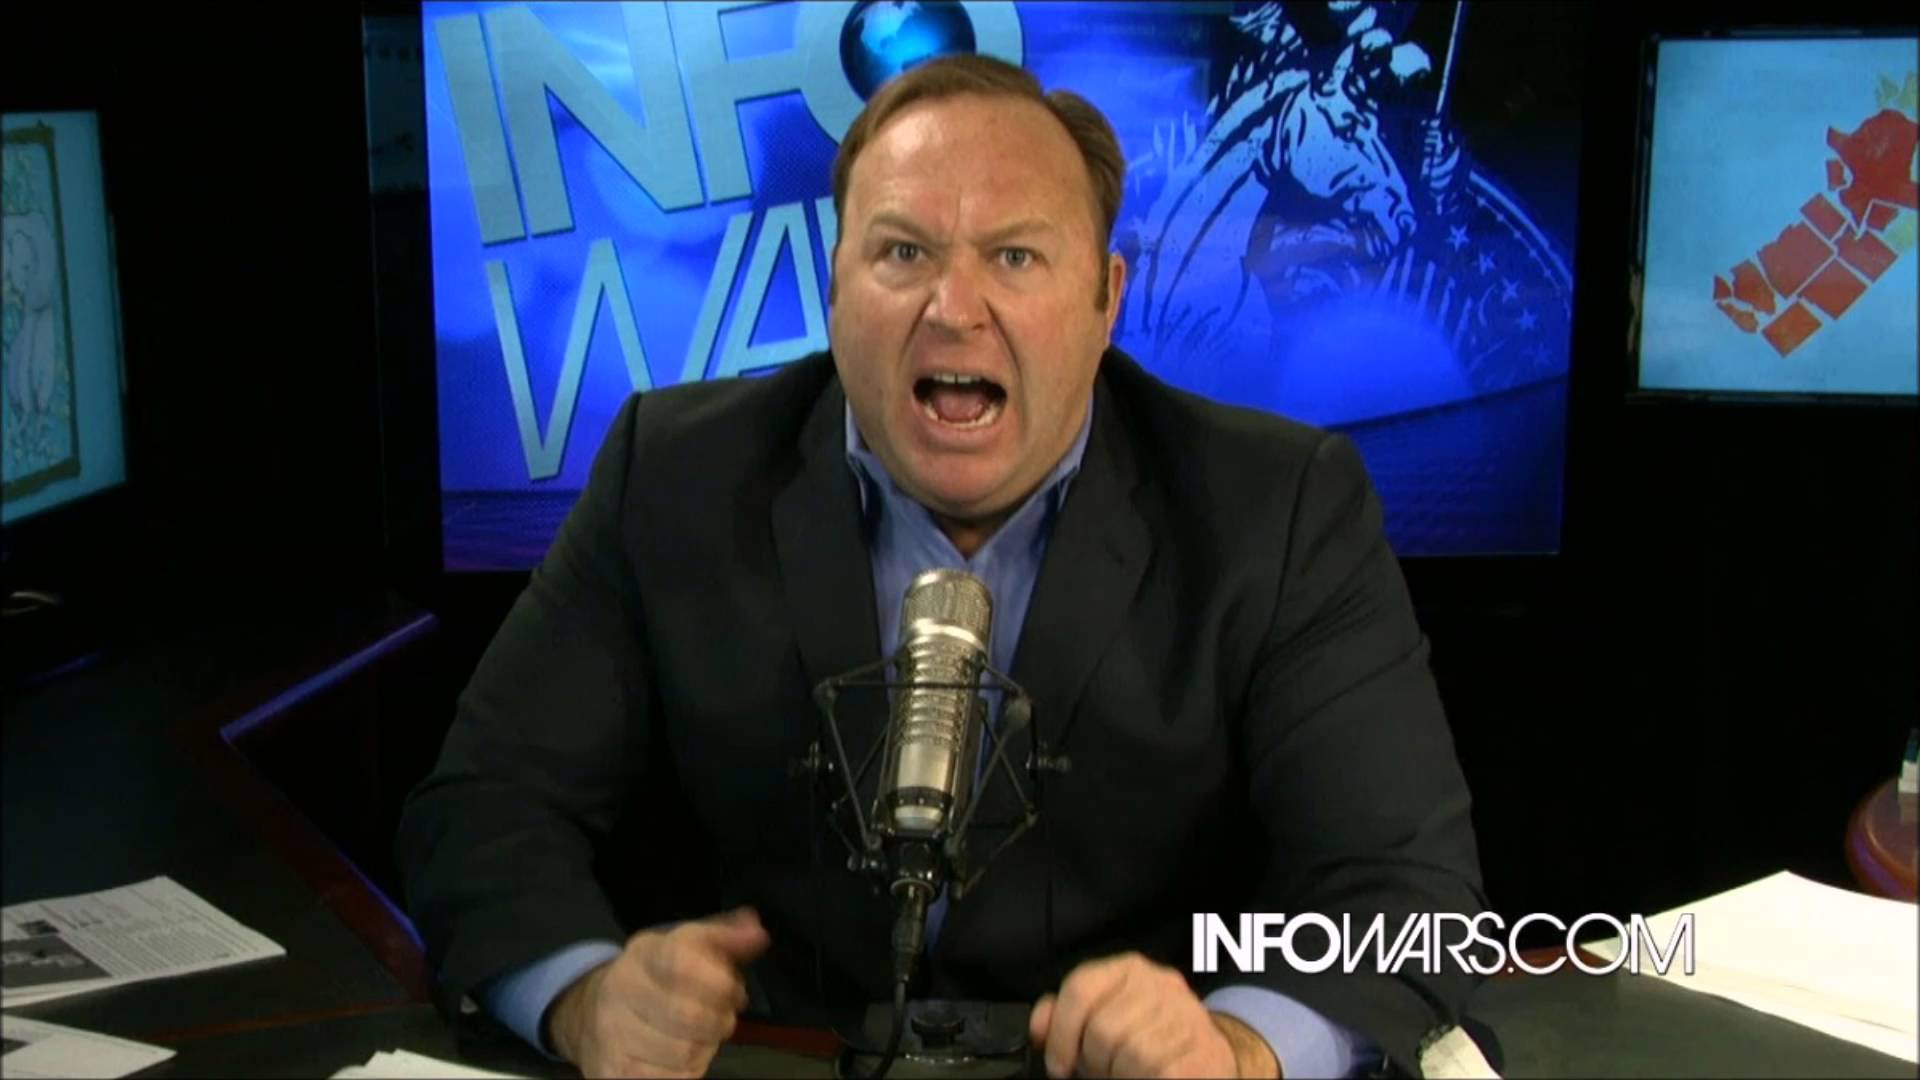 Alex Jones perpetuated conspiracy theories. Now he's being sued